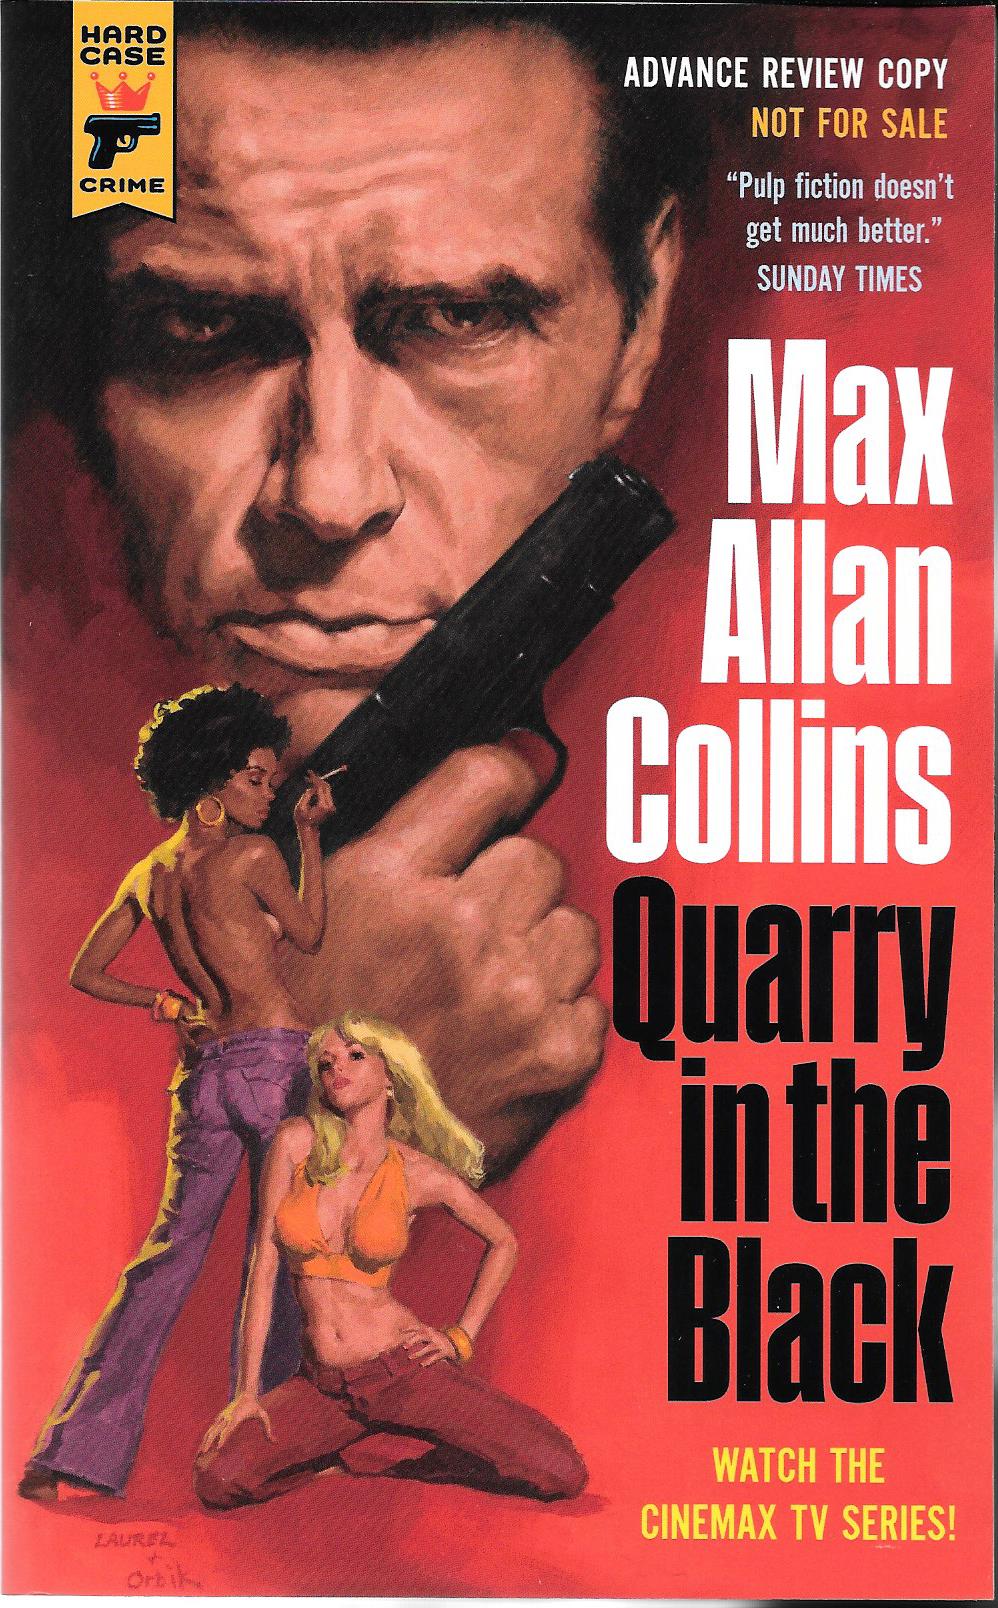 Quary in Black, Book Review By Ron Foriter